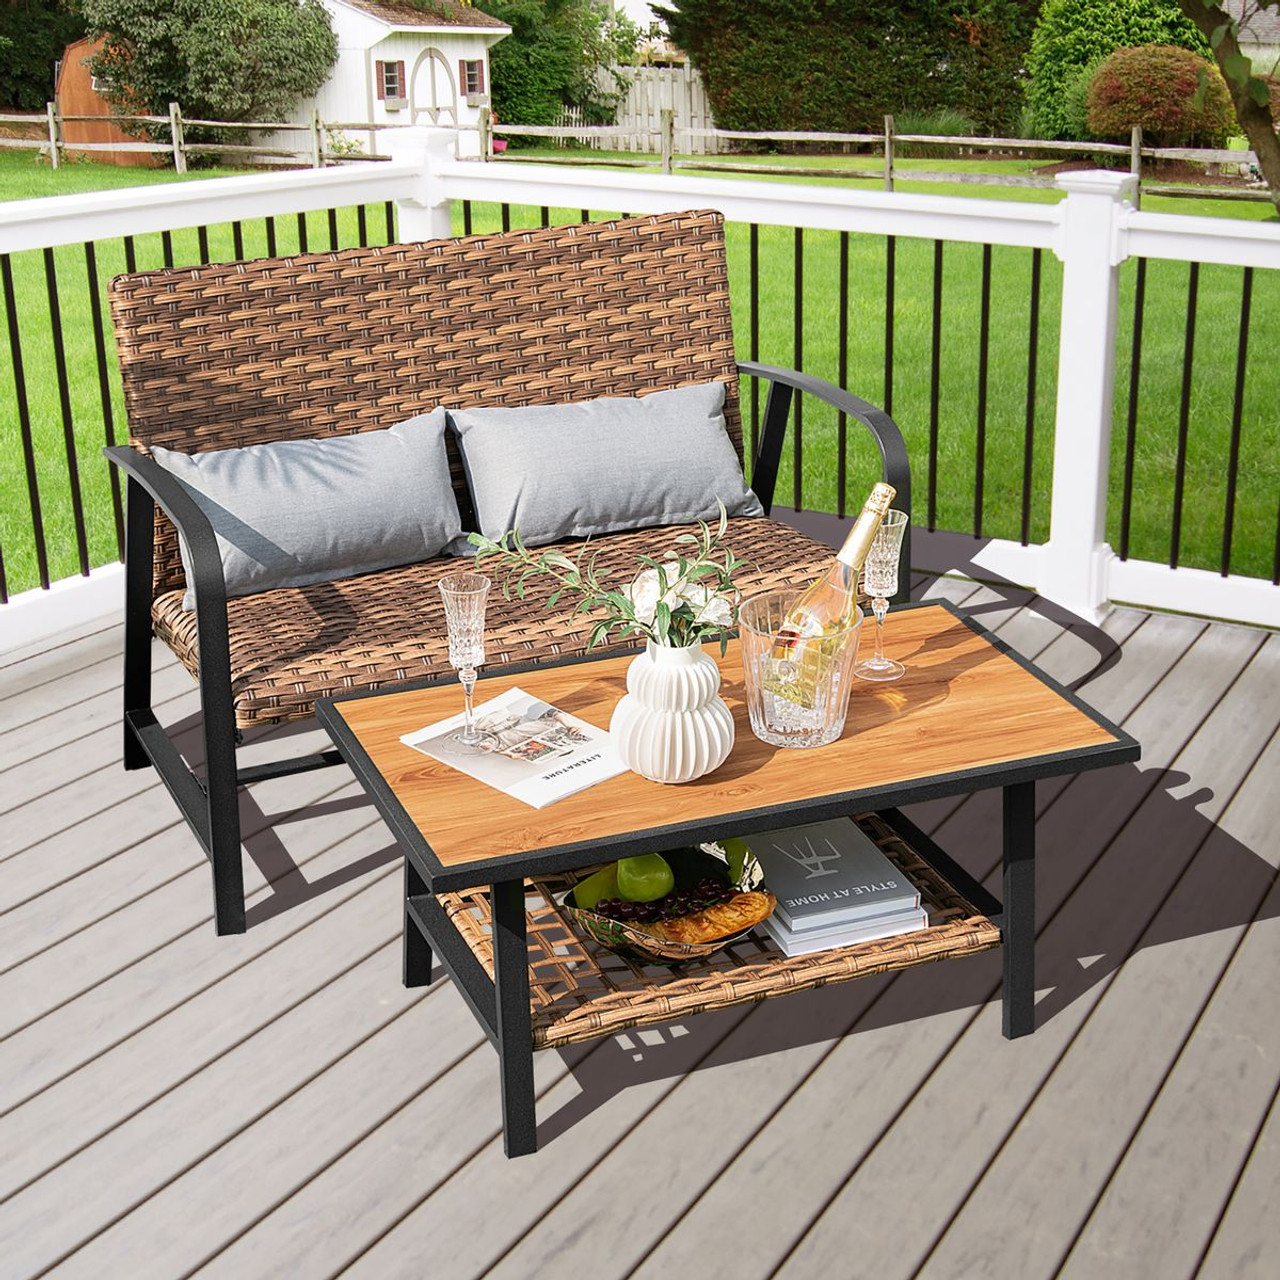 2-Piece Patio Rattan Coffee Table Set with Shelf product image